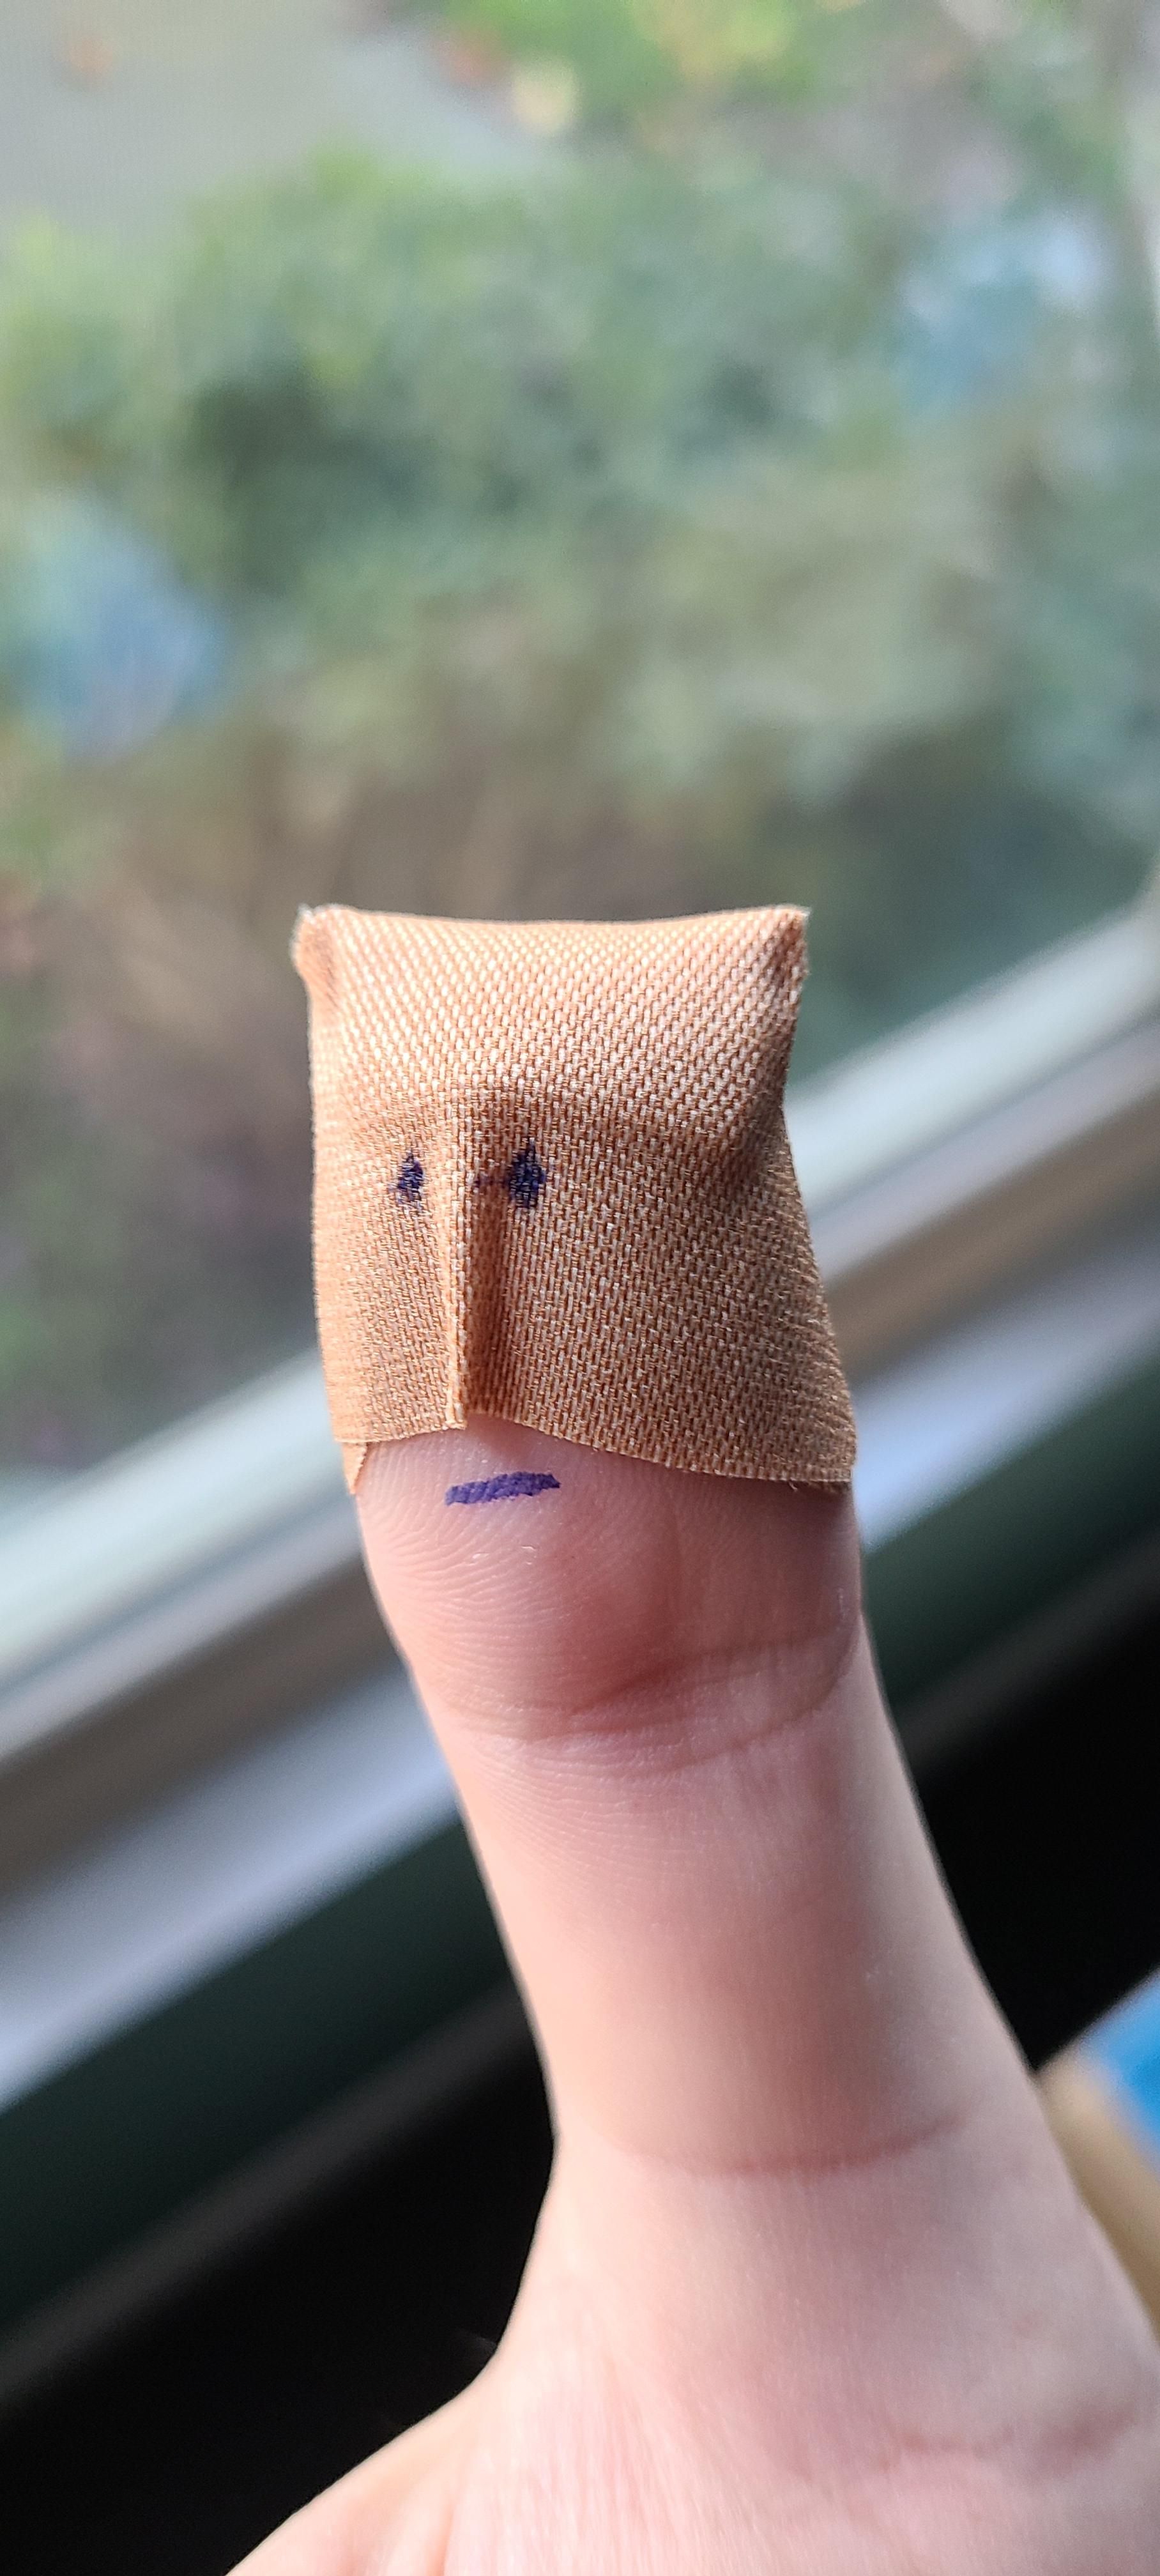 Sliced my finger open. Realized after putting on the bandaid that it looked like a lame superhero.